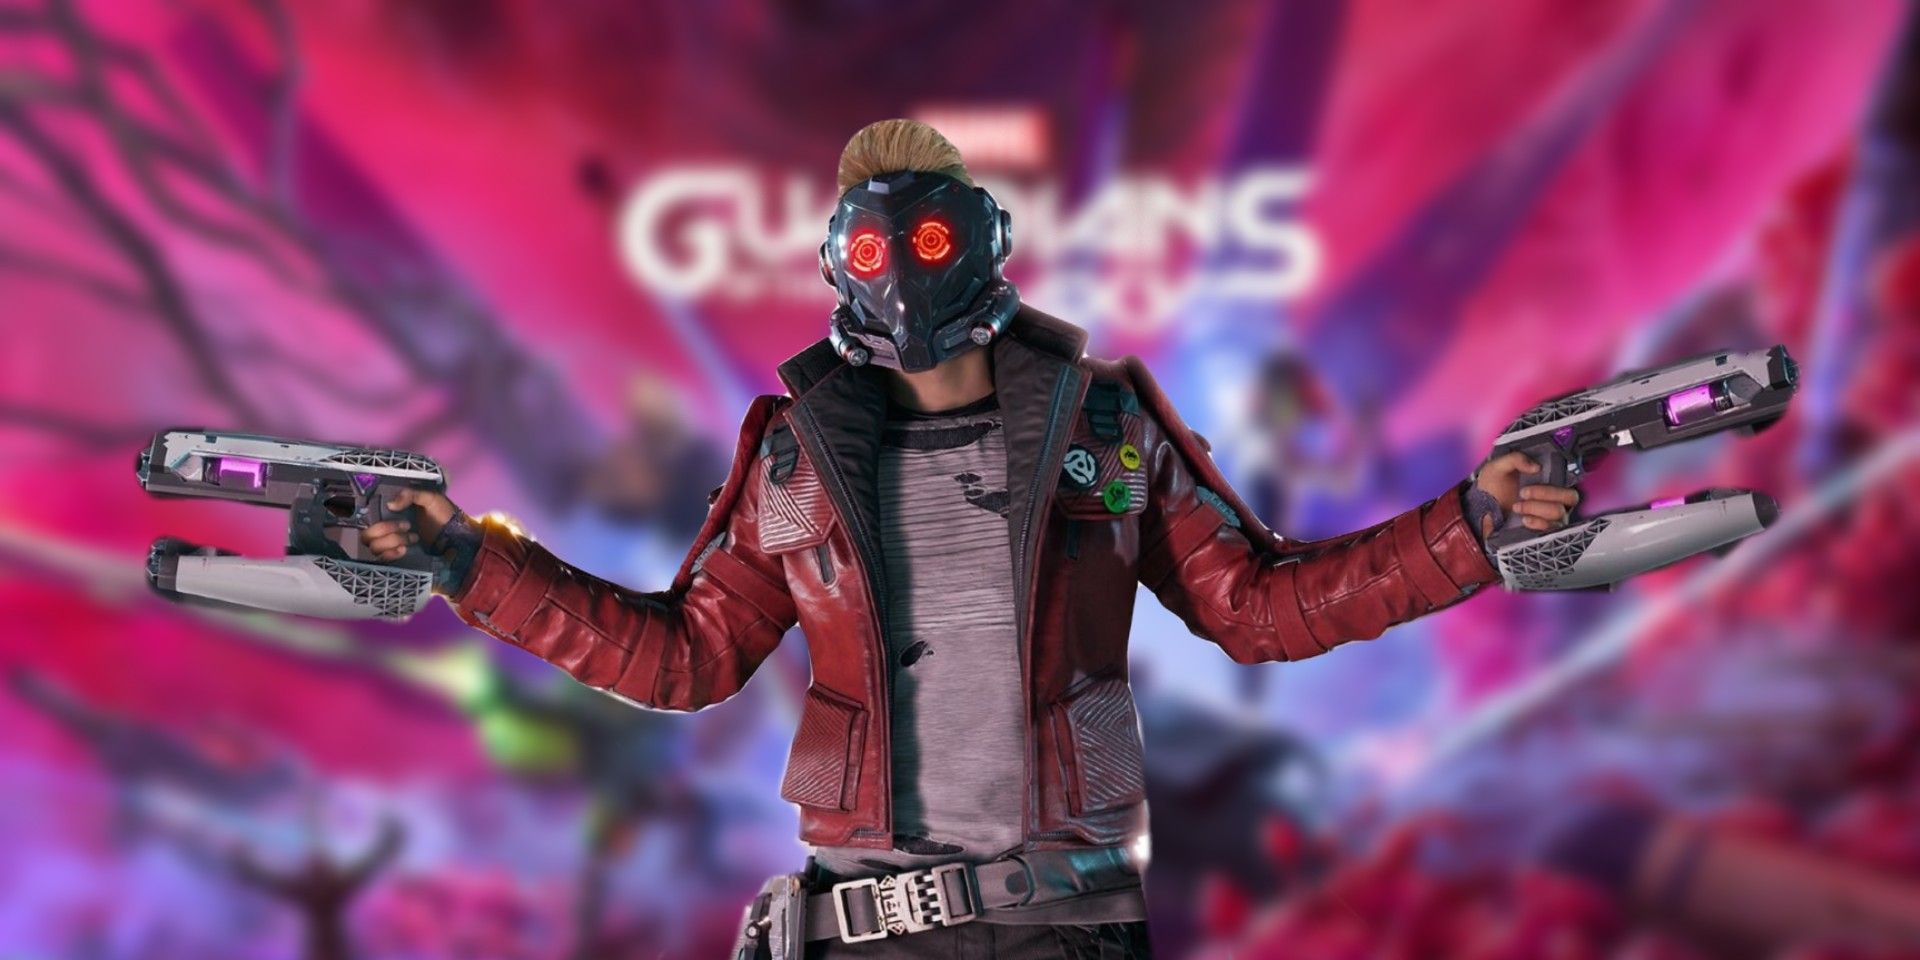 How to Change Songs in Marvel’s Guardians of the Galaxy